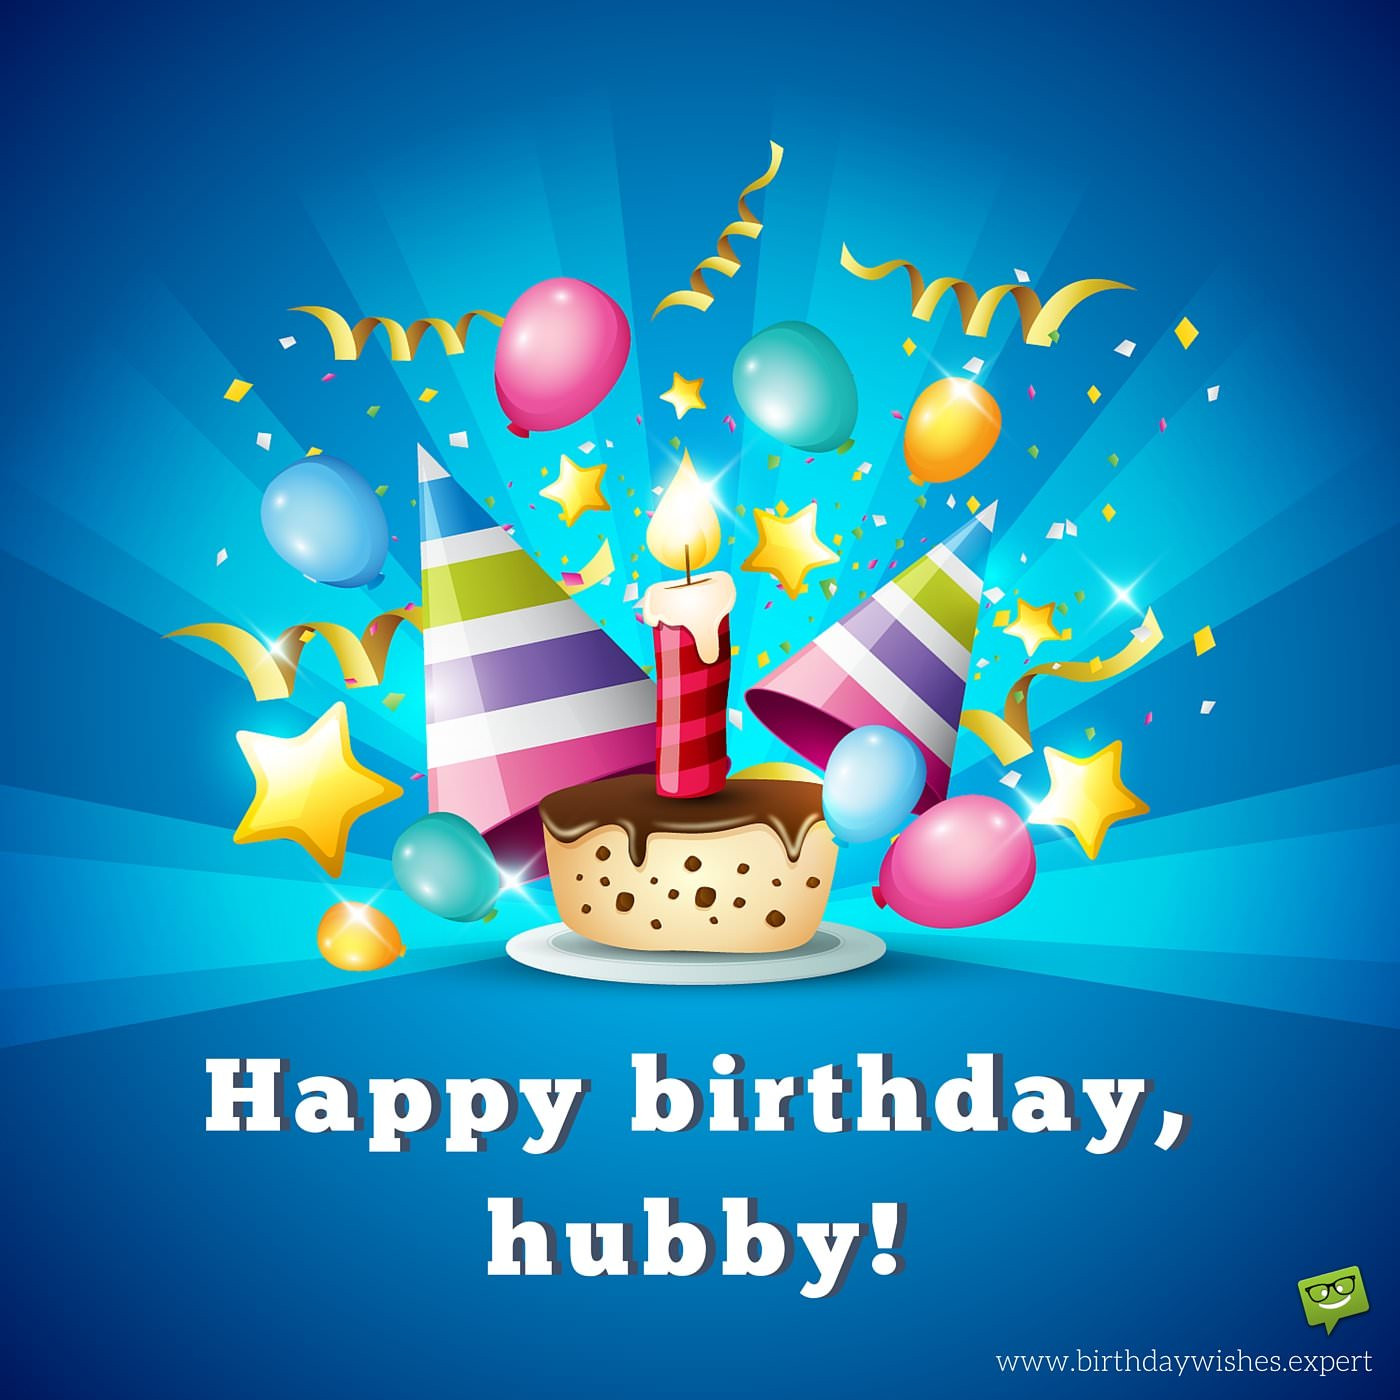 Birthday Wishes For Your Husband
 50 Romantic Birthday Wishes for your Husband